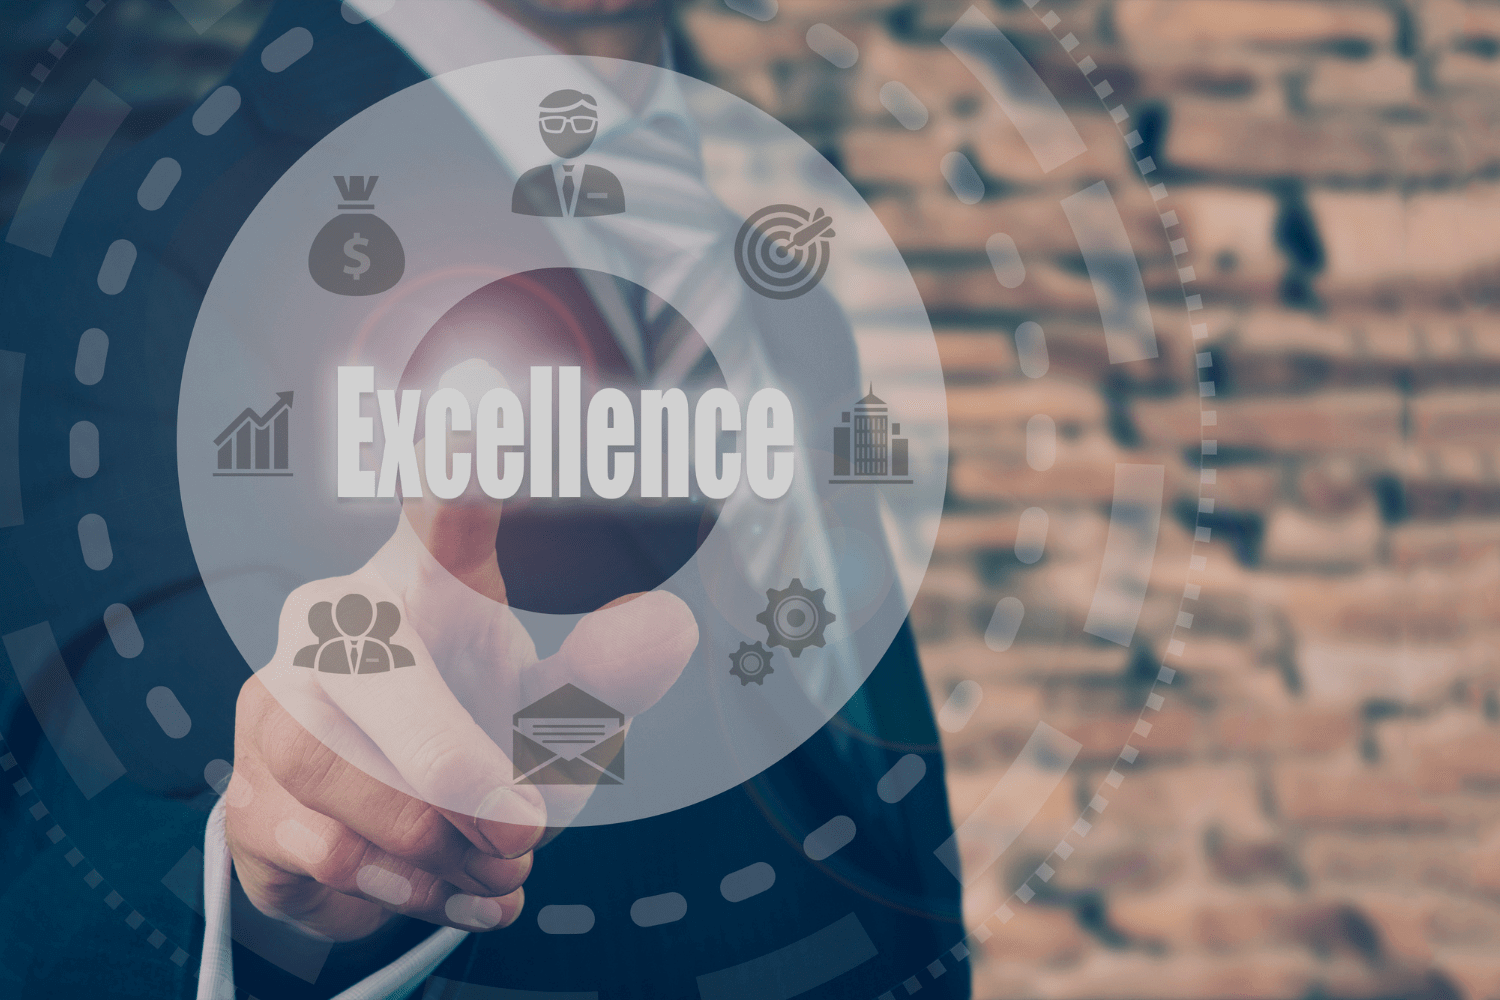 A person in a suit interacts with a futuristic virtual interface displaying icons related to business elements. The central word “Excellence” stands out, surrounded by digital lines and circles. The background features blurred brick walls and ambient lighting